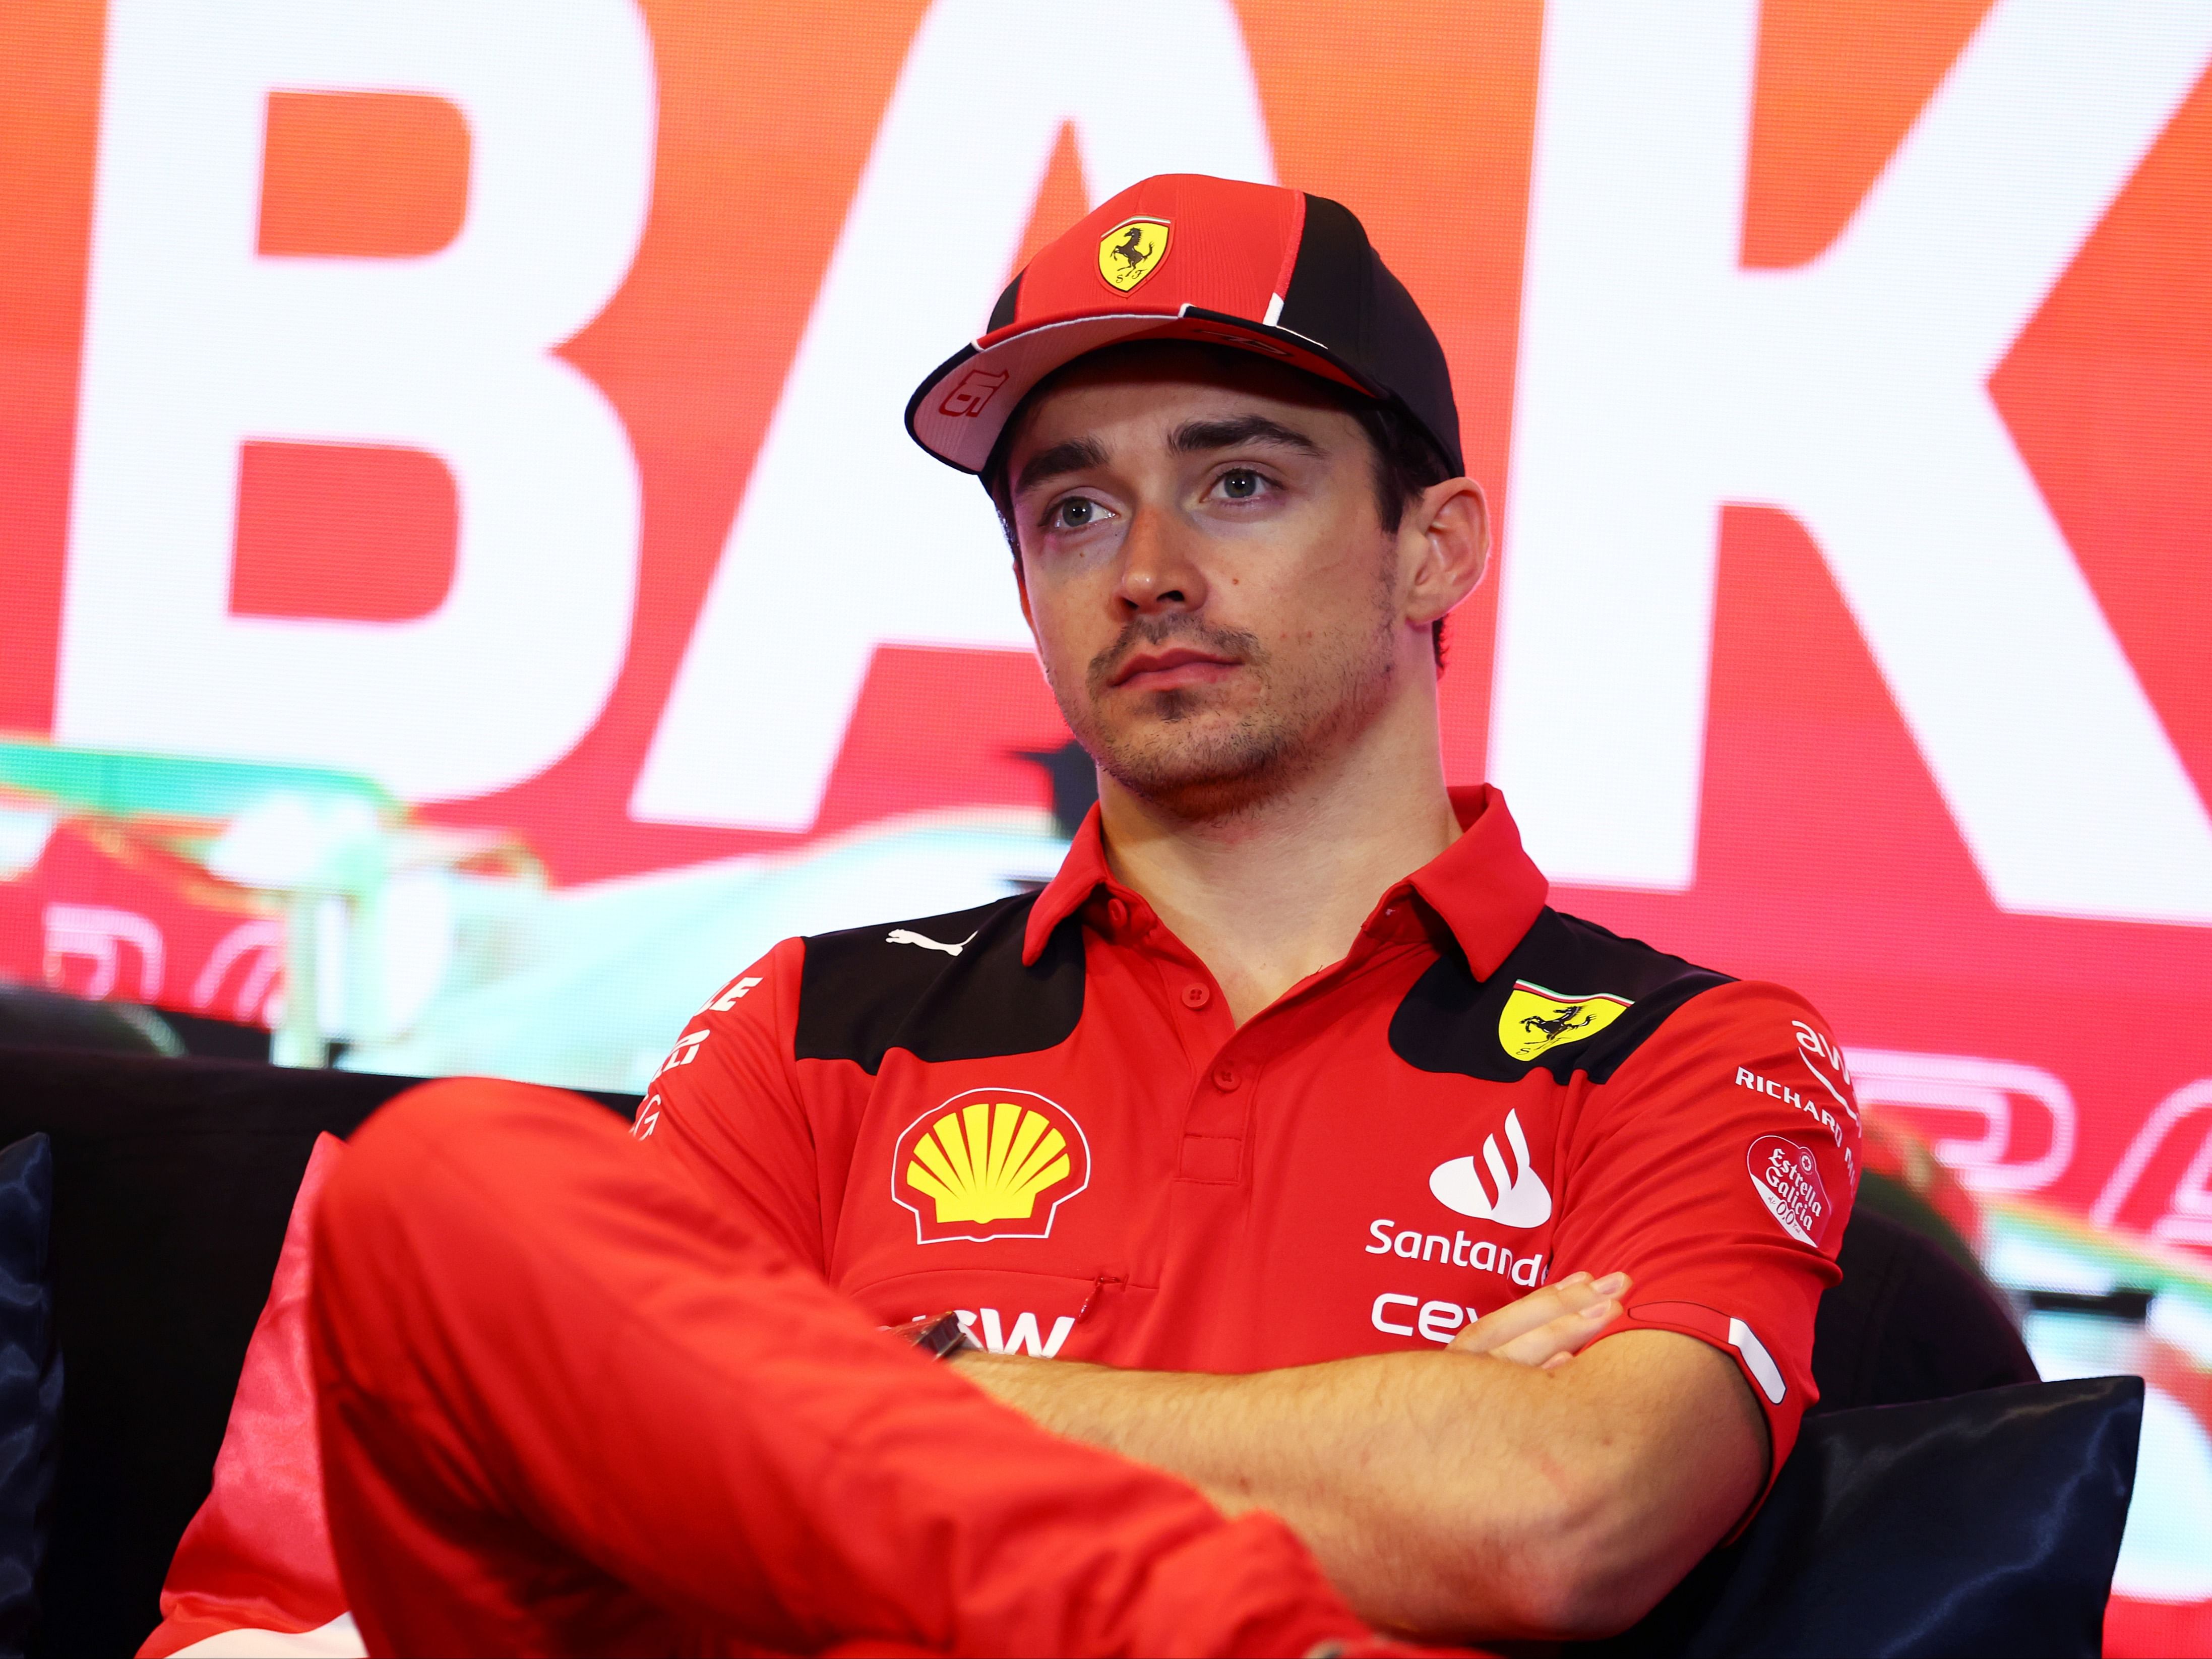 F1 Grand Prix of AzerbaijanCharles Leclerc attends the press conference after the 2023 F1 Azerbaijan Grand Prix. (Photo by Bryn Lennon/Getty Images)